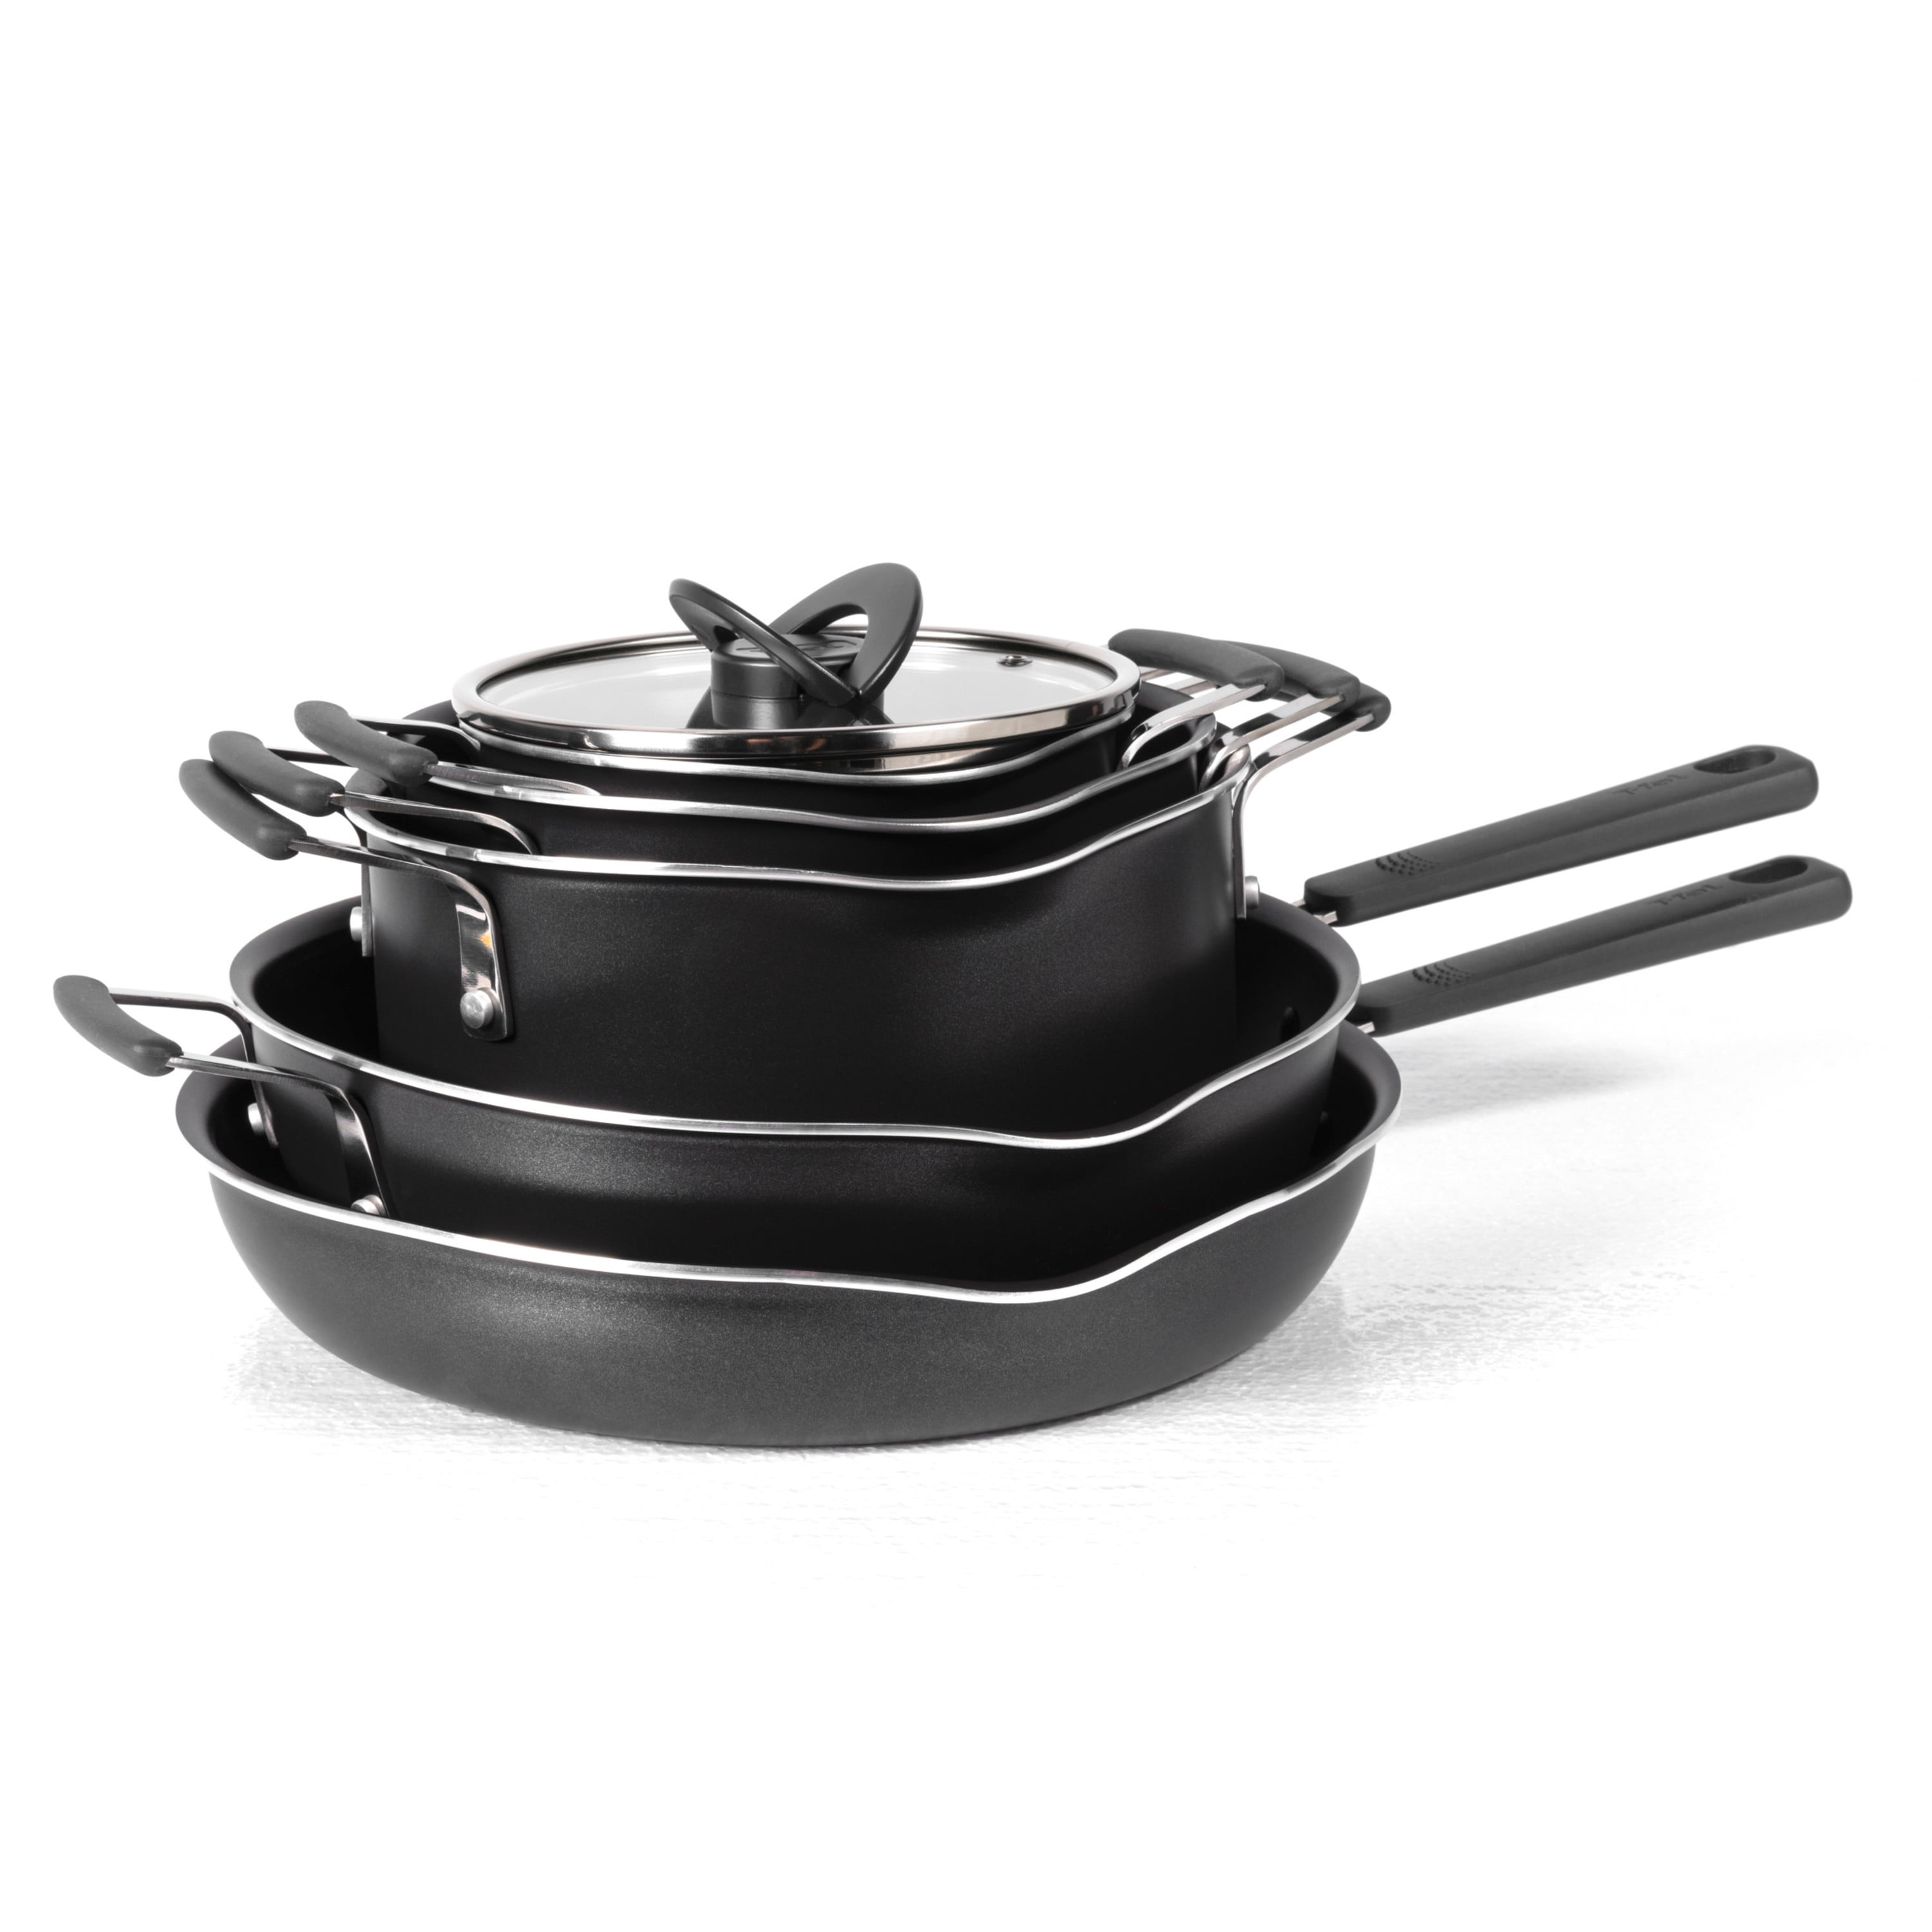 T-Fal cookware set: Save big on our favorite nonstick cookware set